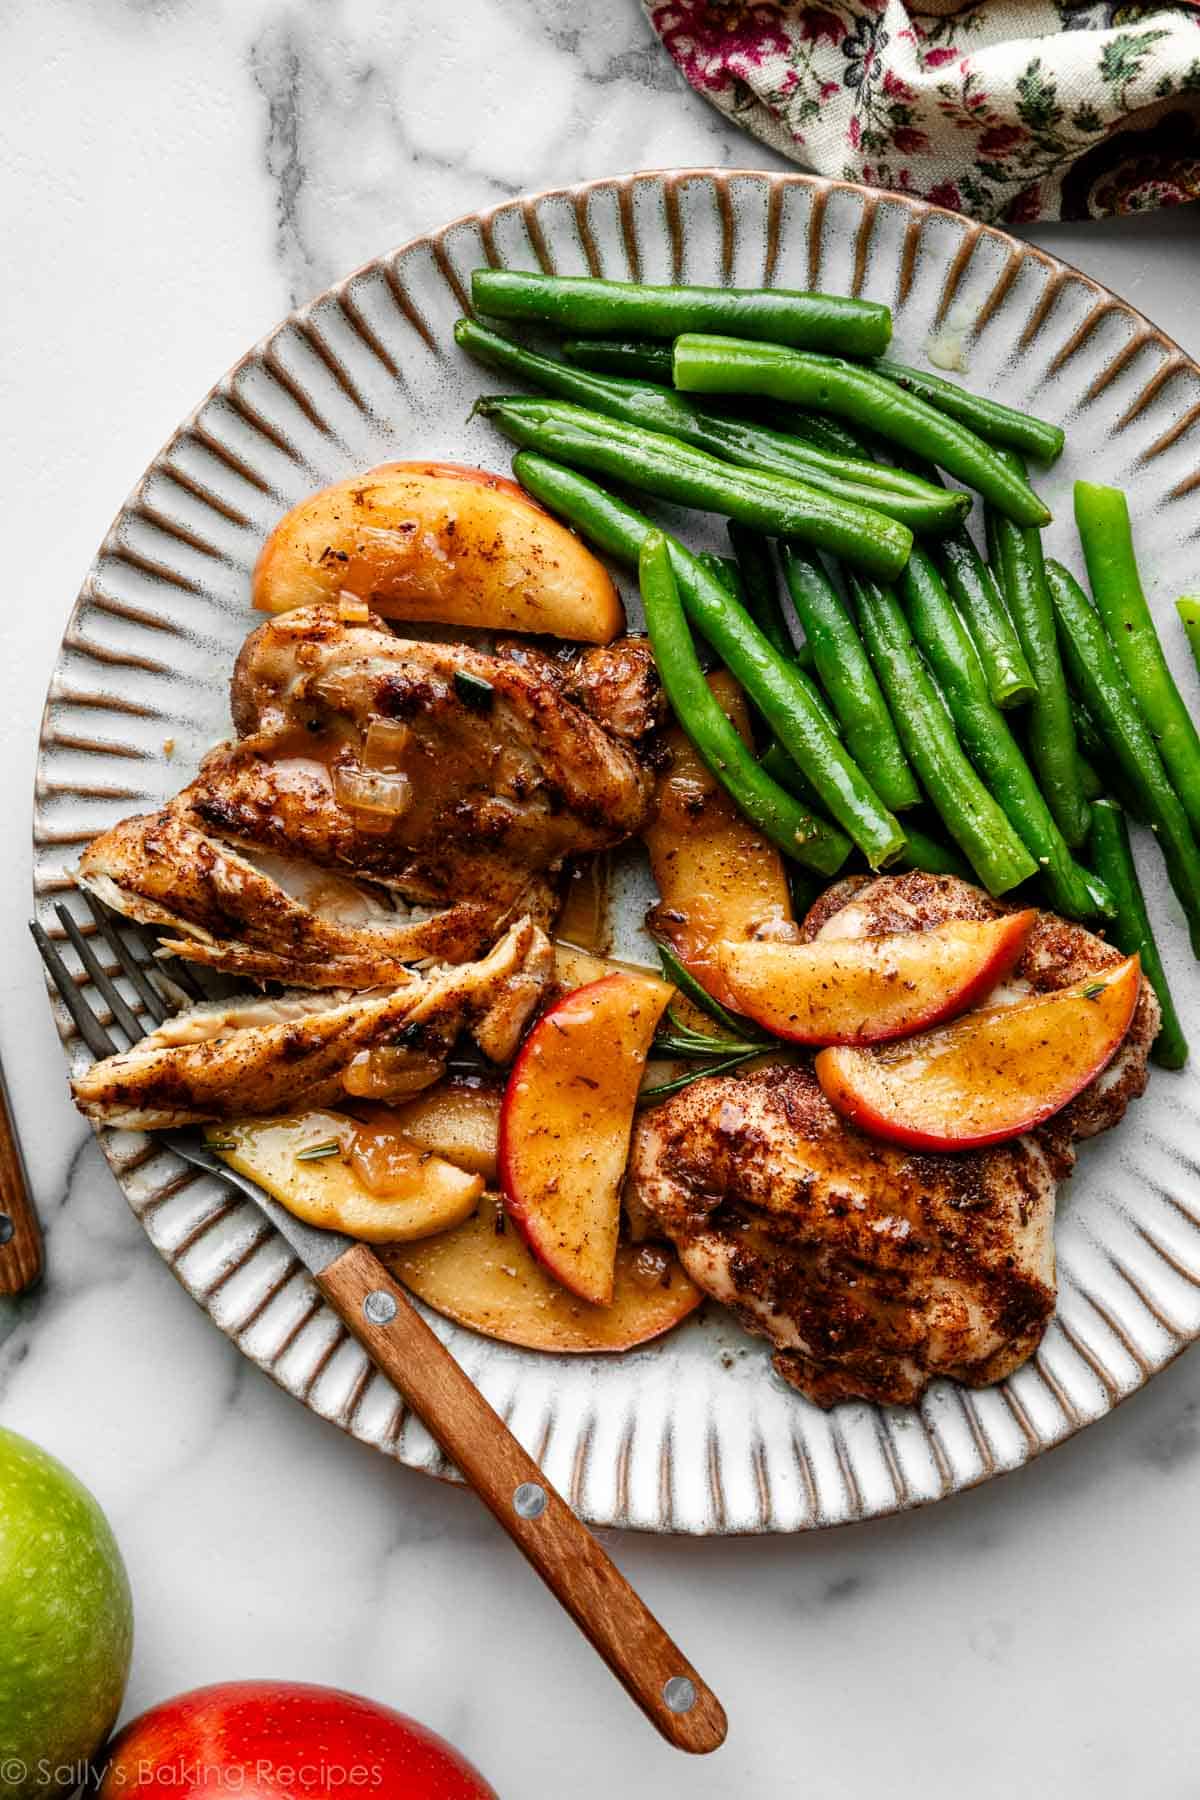 apple cider chicken and apple slices with green beans on plate.